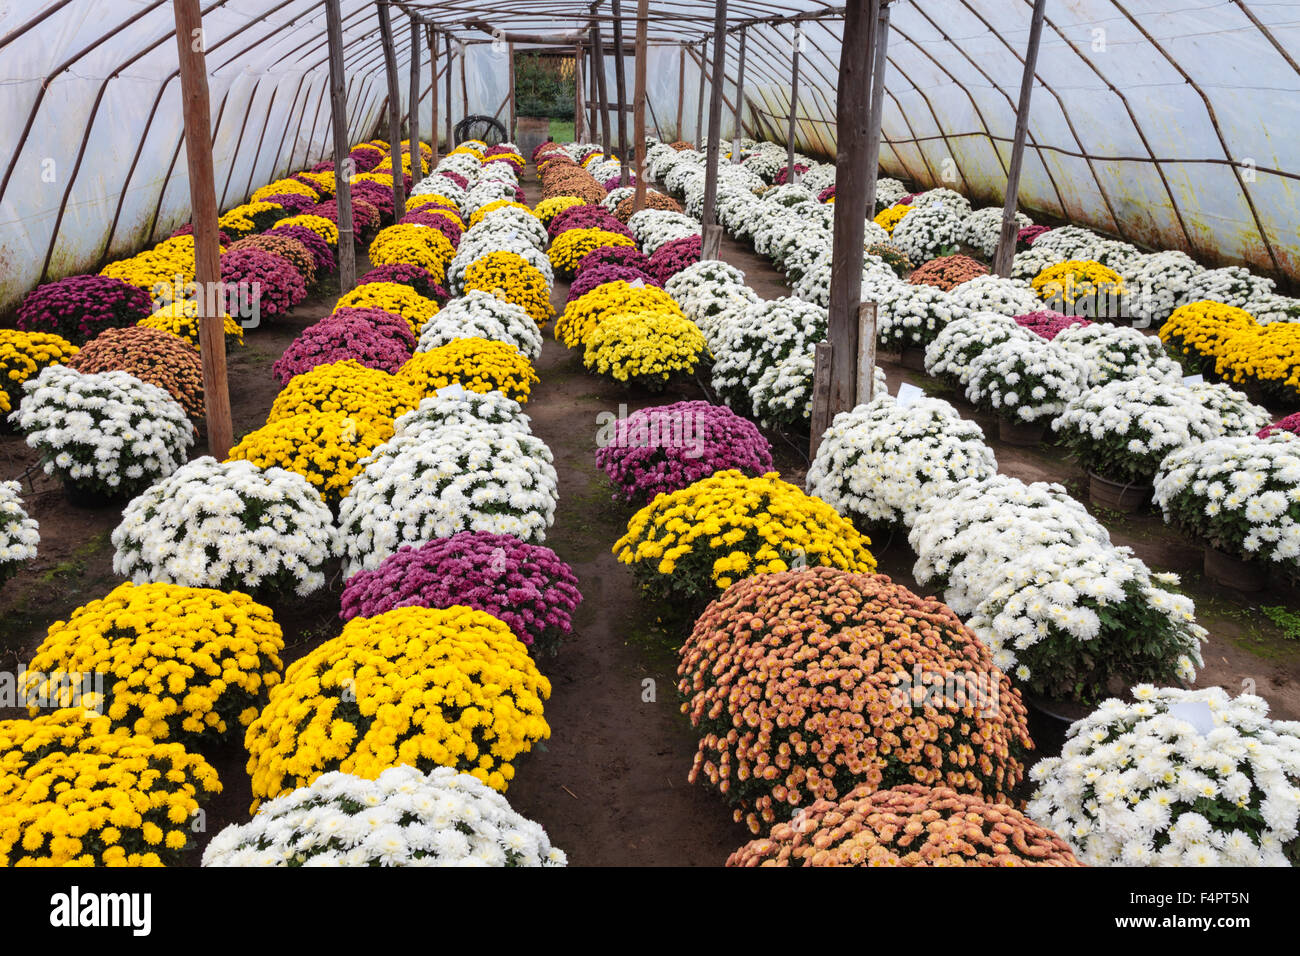 White pink yellow Chrysanthemum Morifolium flowers garden in greenhouse, before 1-st November as All Saints Day in Christianity. Stock Photo